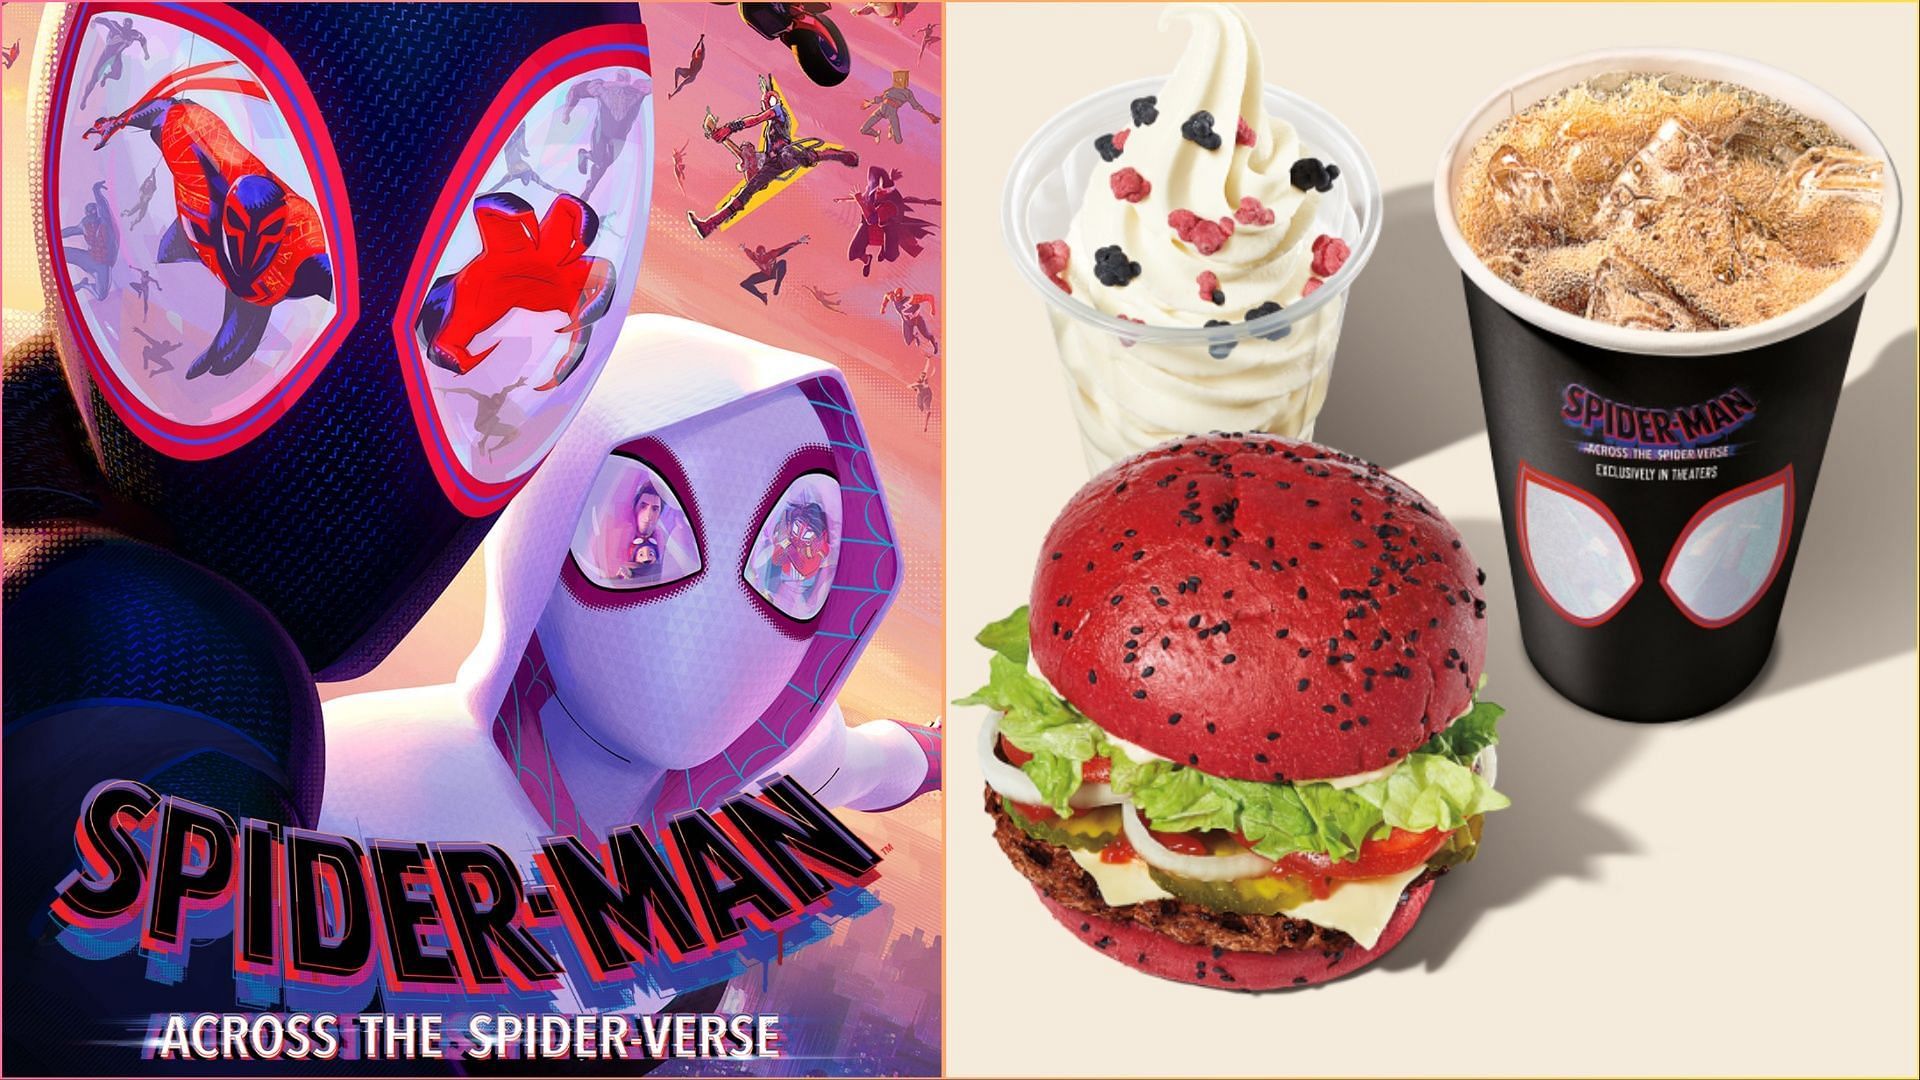 Burger King SpiderMan meal Where to buy, price, availability, and all